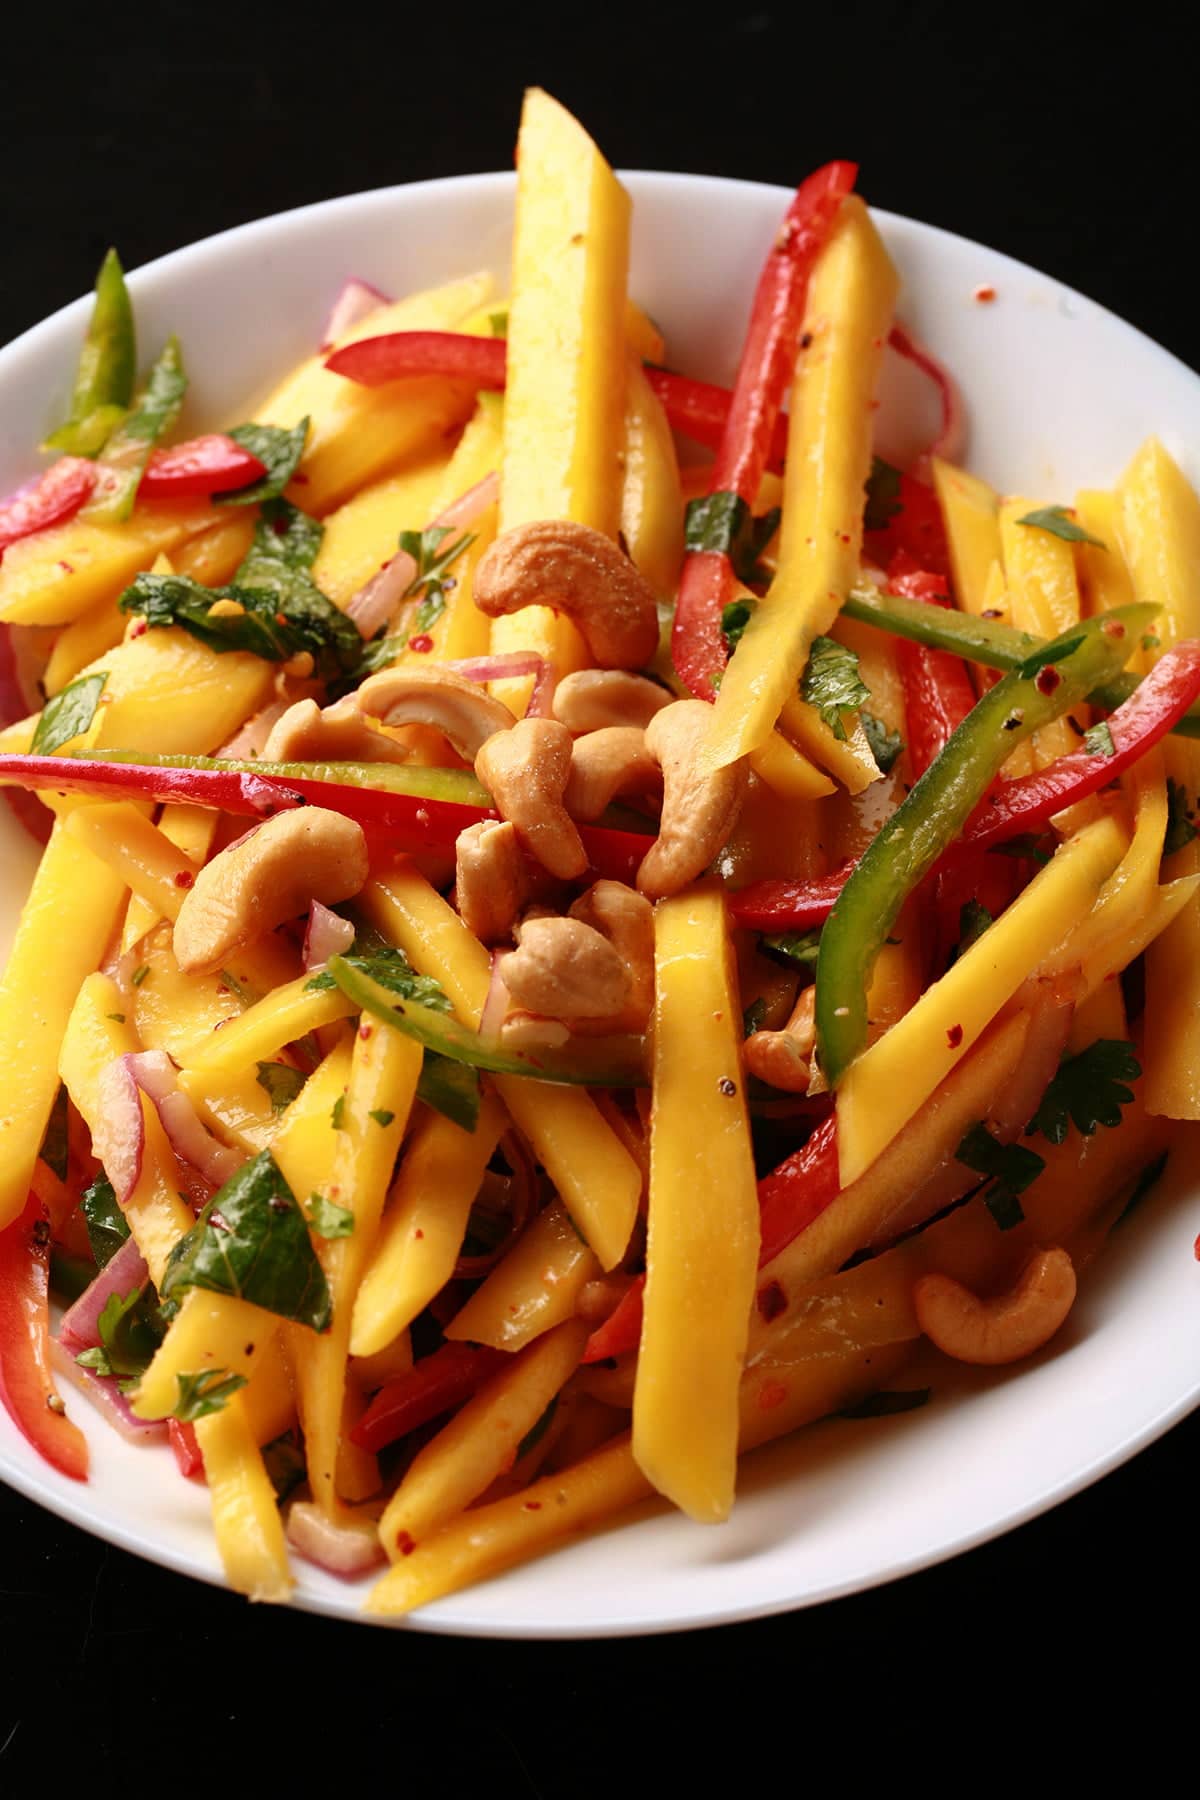 A close up view of Mango Salad - thin sticks of mango, red pepper, green pepper, red onions, and cashews. It's dressed with lime juice and pieces of cilatro and mint.